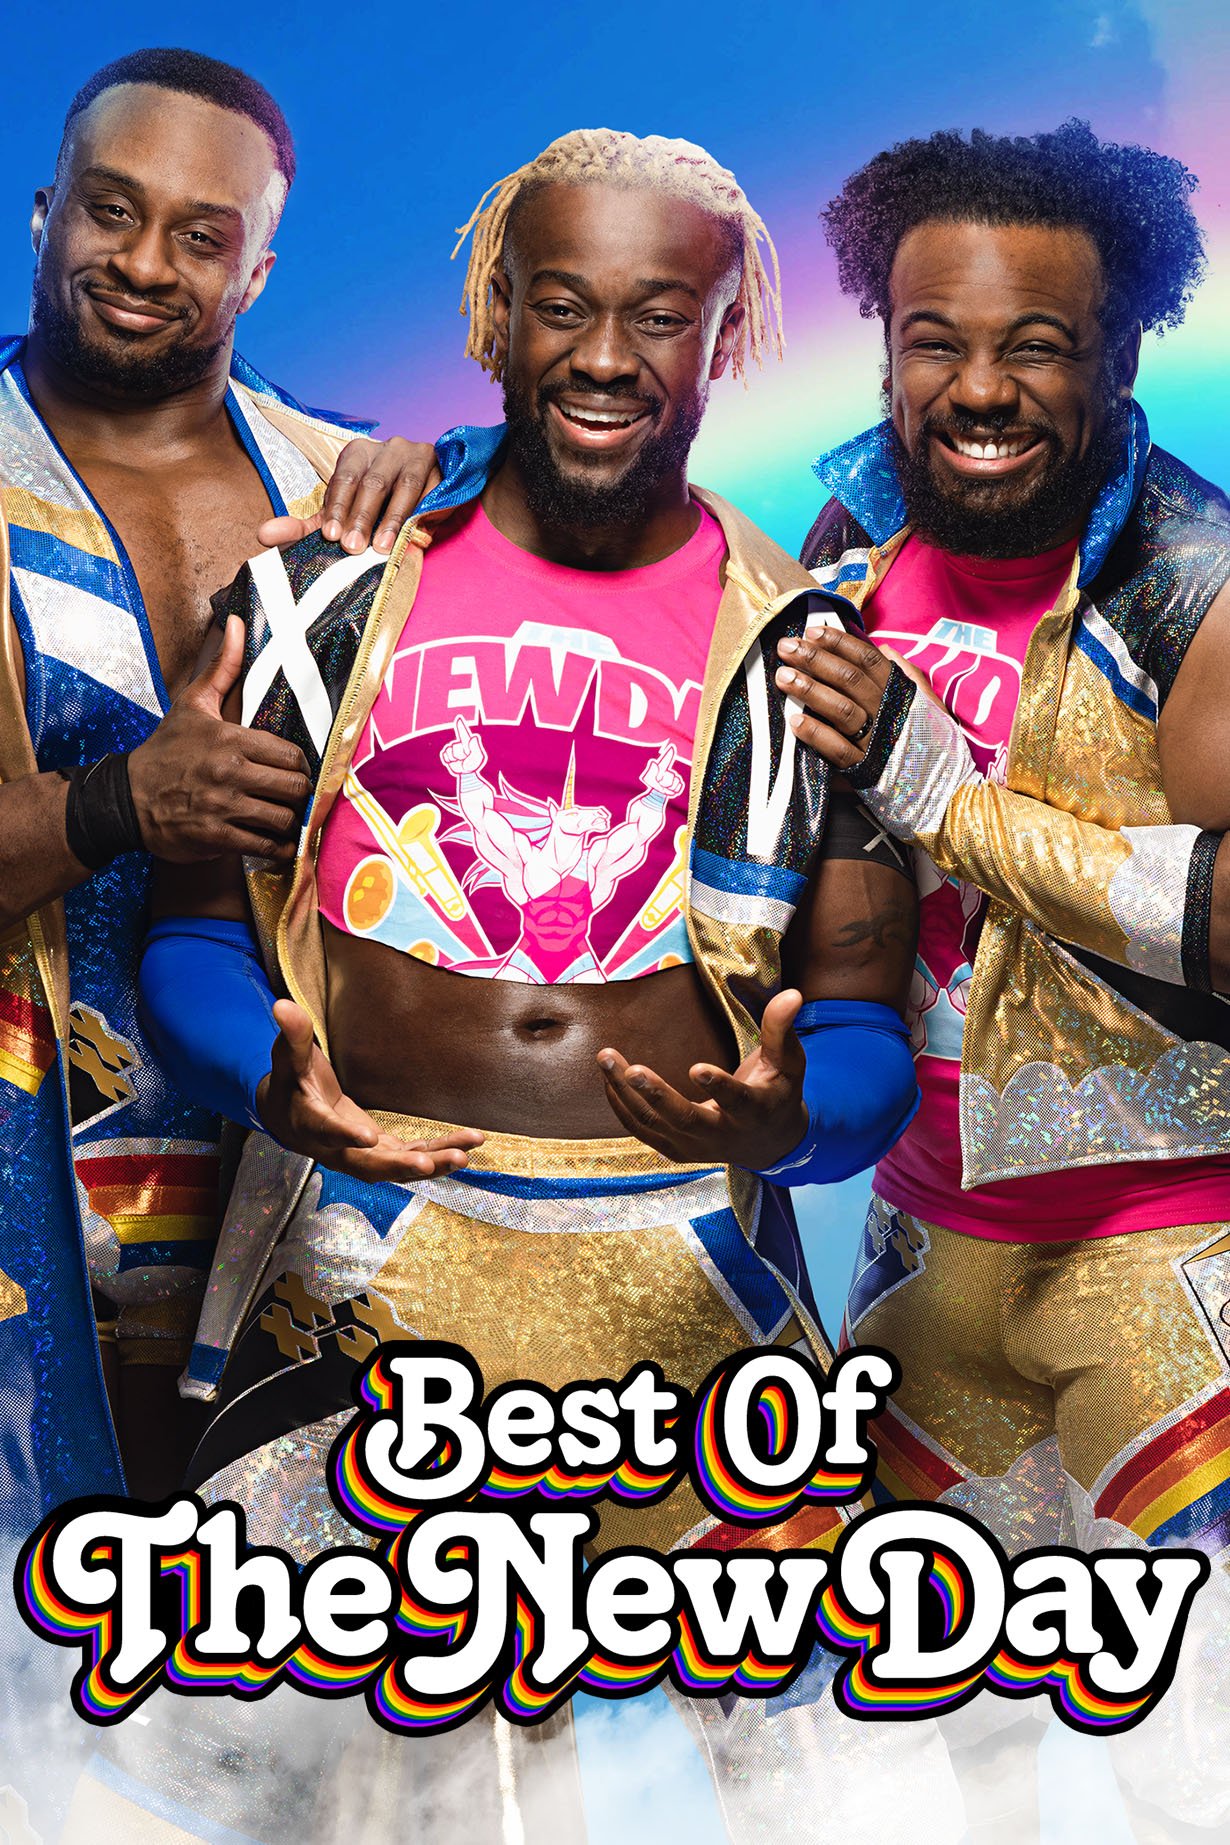 The Best of WWE: The Best of the New Day (2020) постер